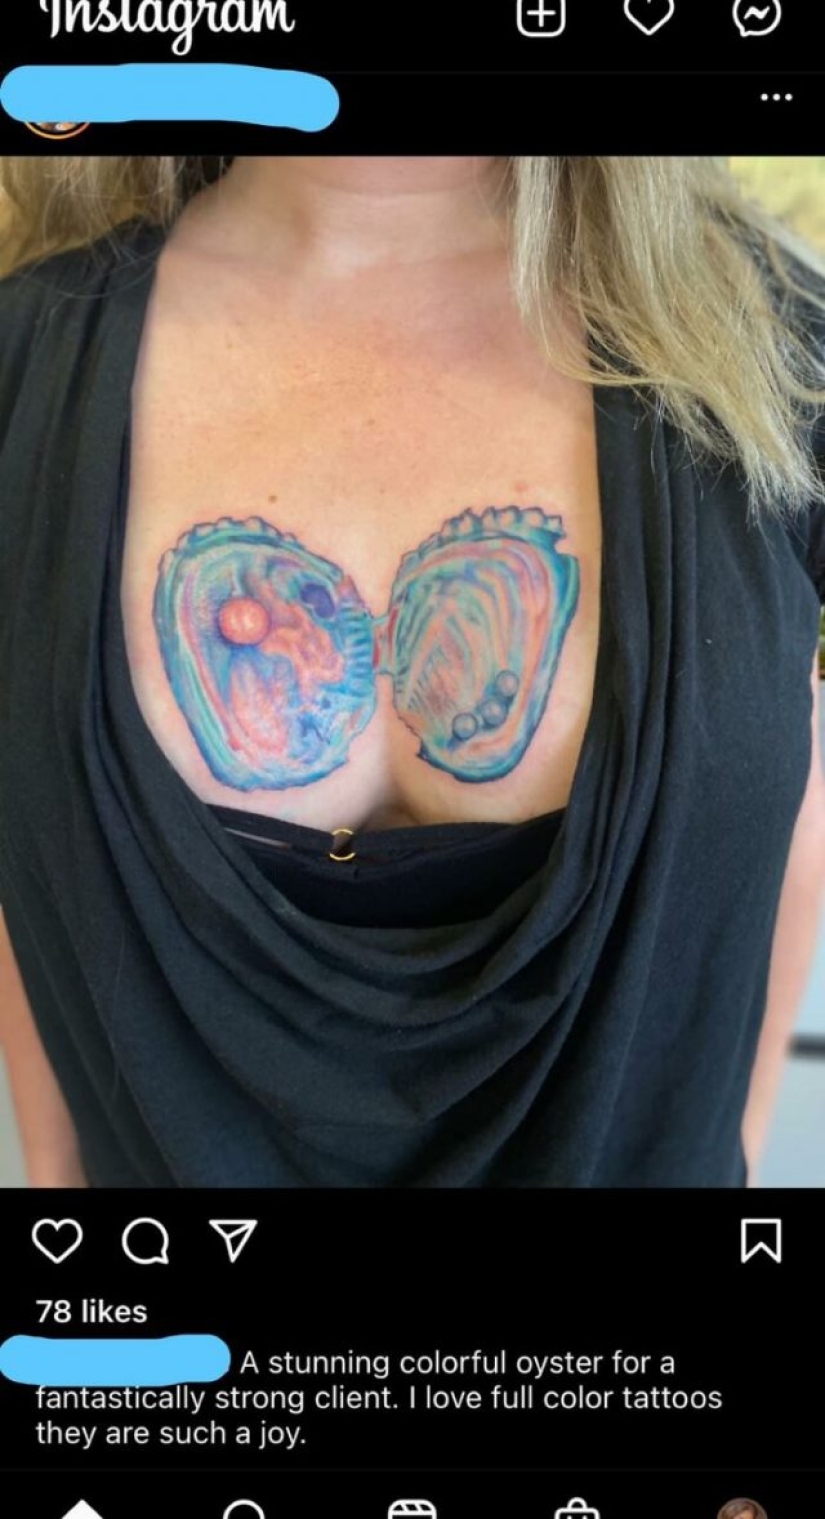 10 Times People Didn't Even Realize How Awful Their Tattoos Are